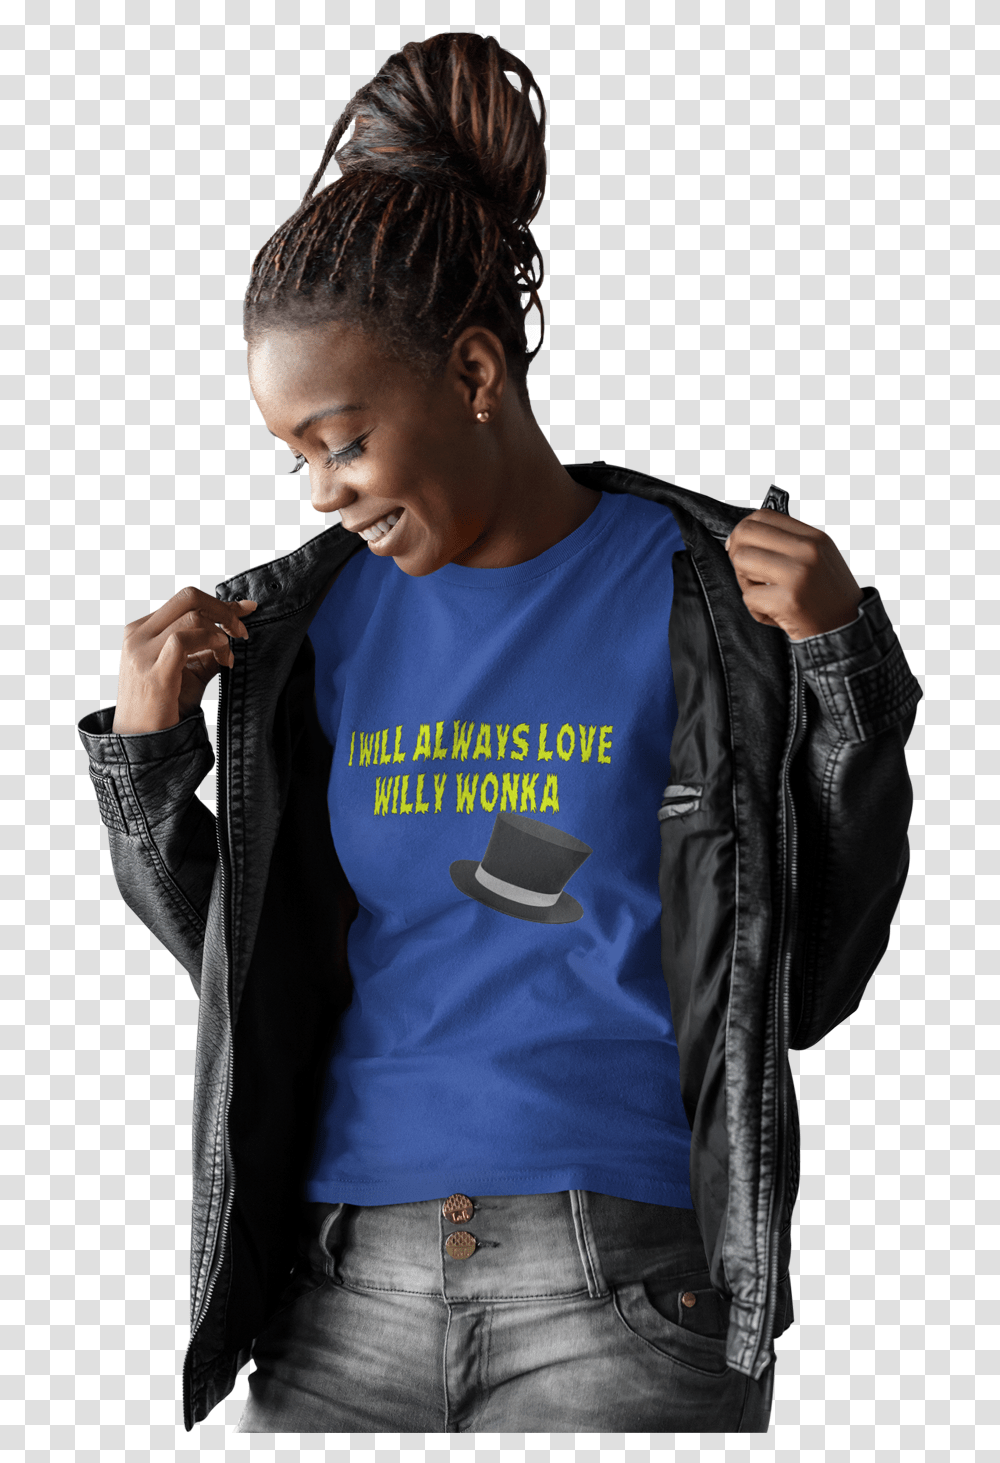 I Will Always Love Willy Wonka Woman T Shirt Mockup Jacket, Apparel, Sleeve, Long Sleeve Transparent Png